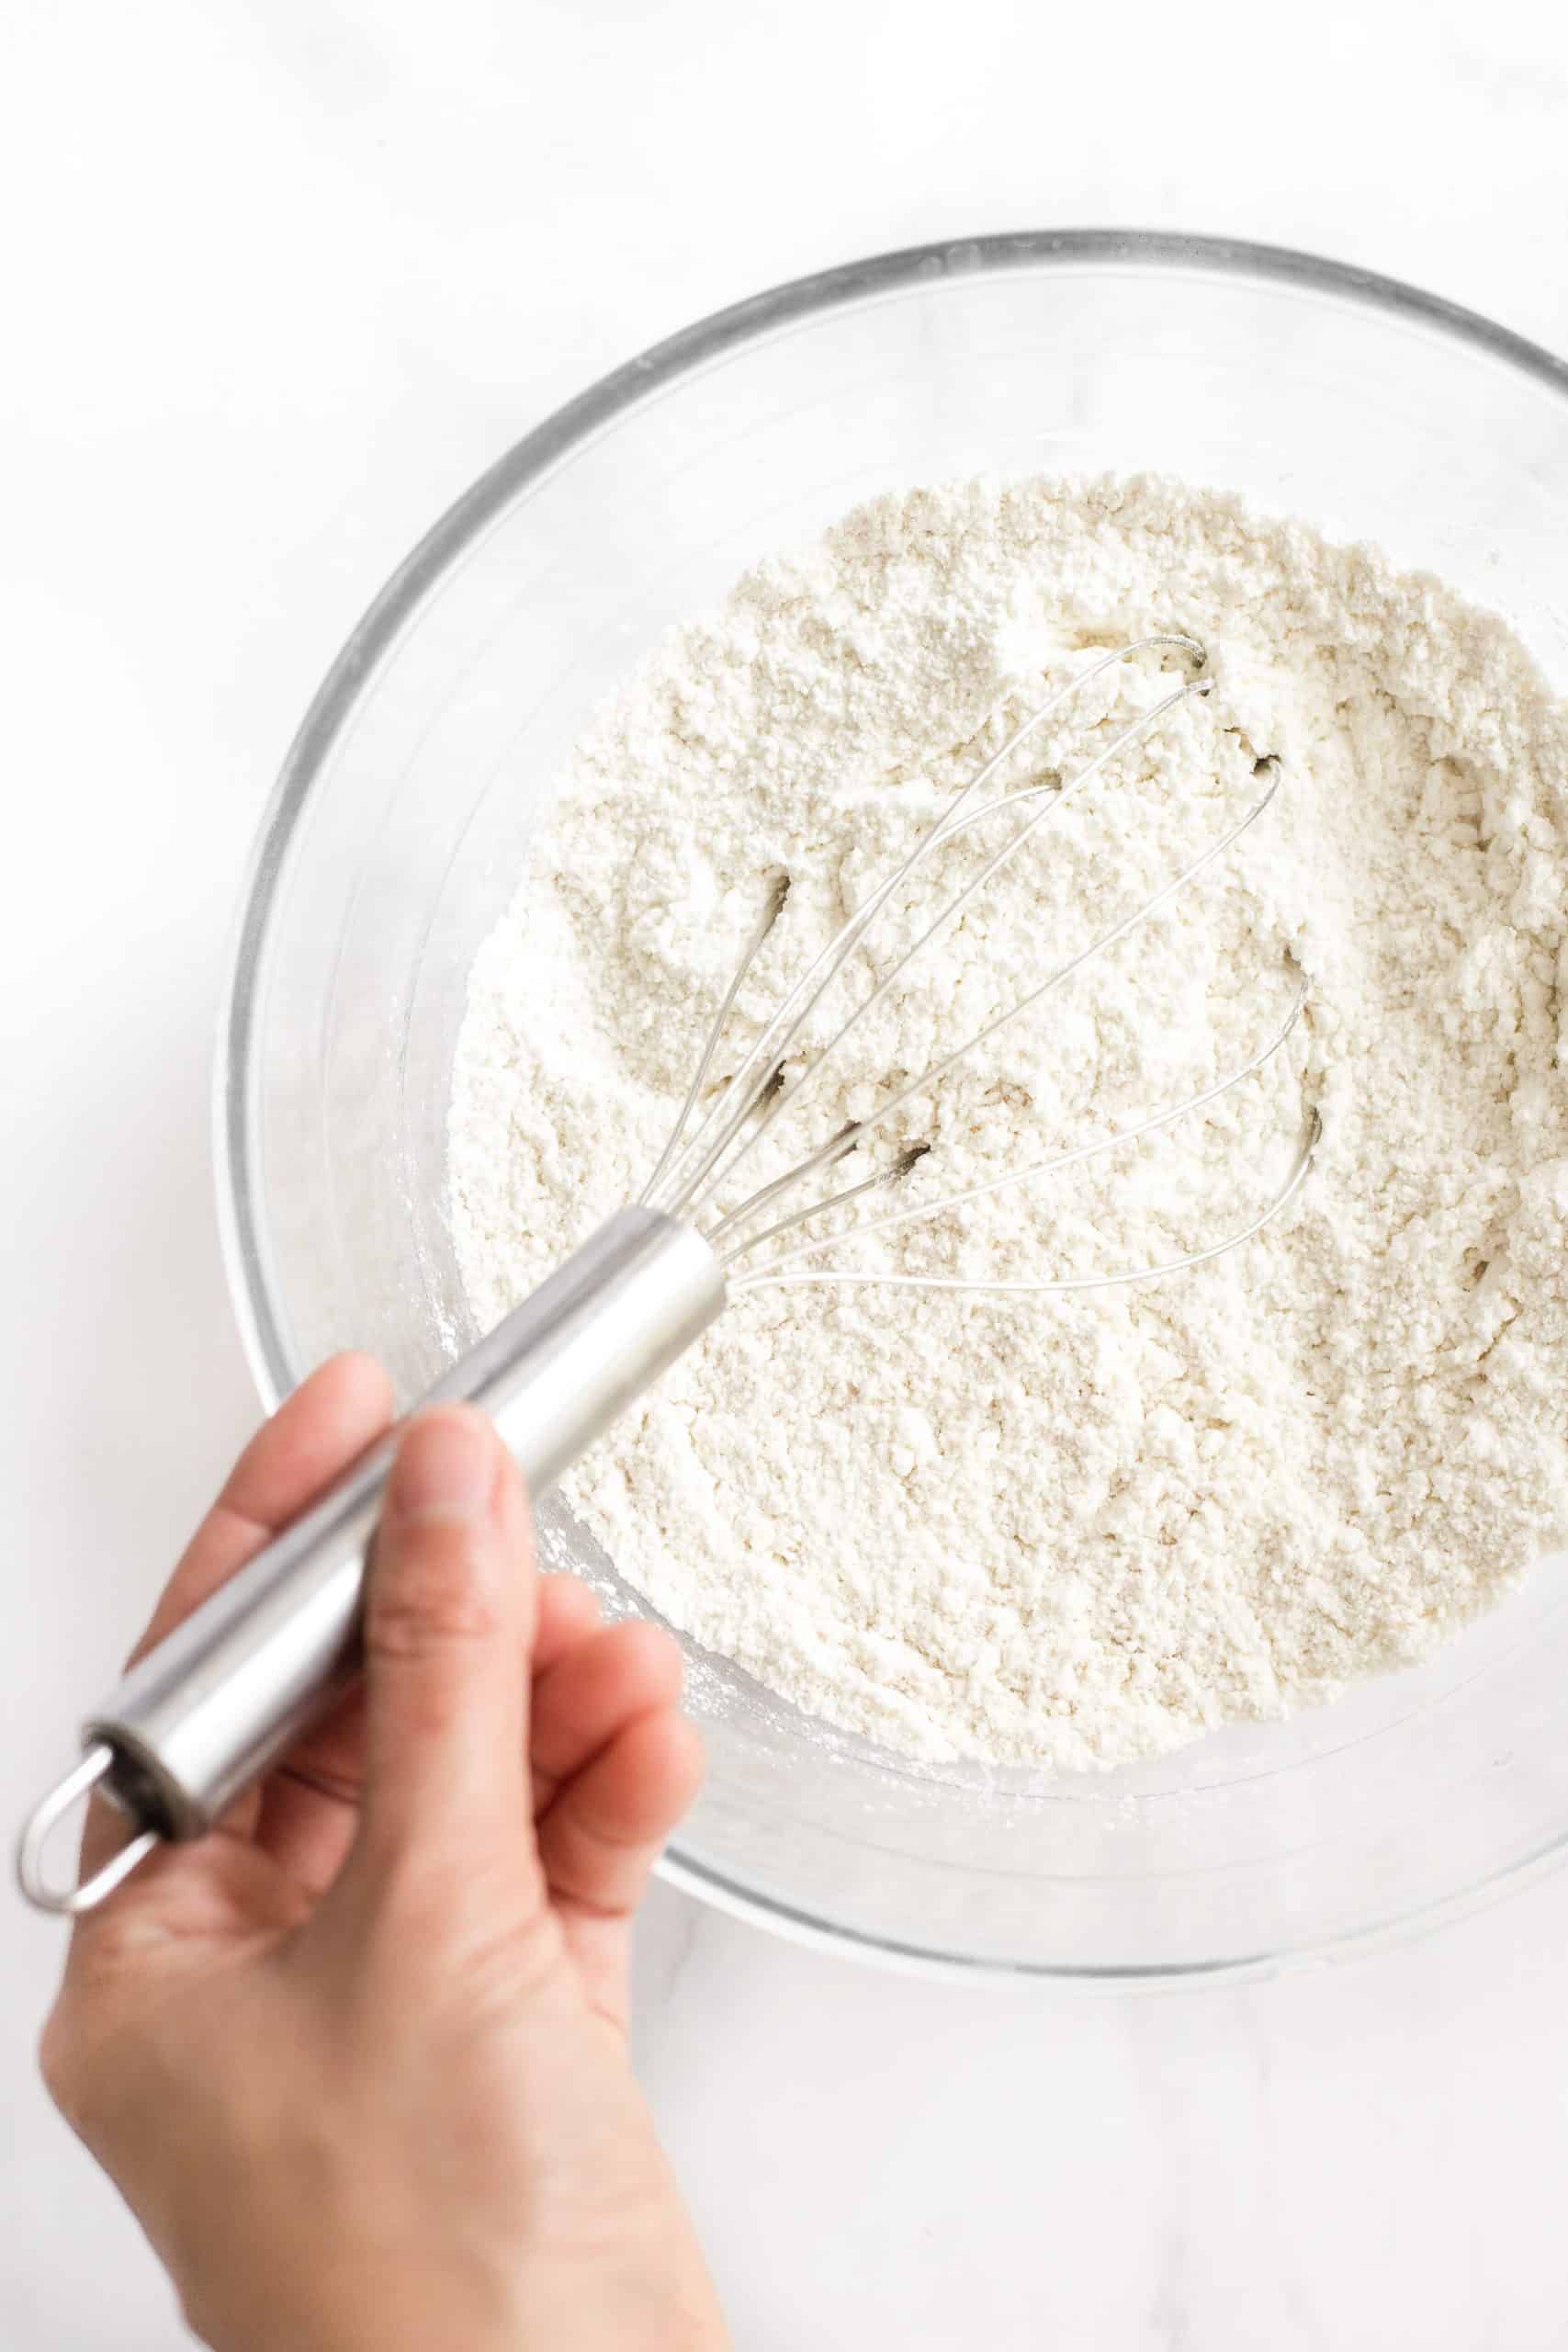 Hand whisking dry ingredients in a glass mixing bowl.